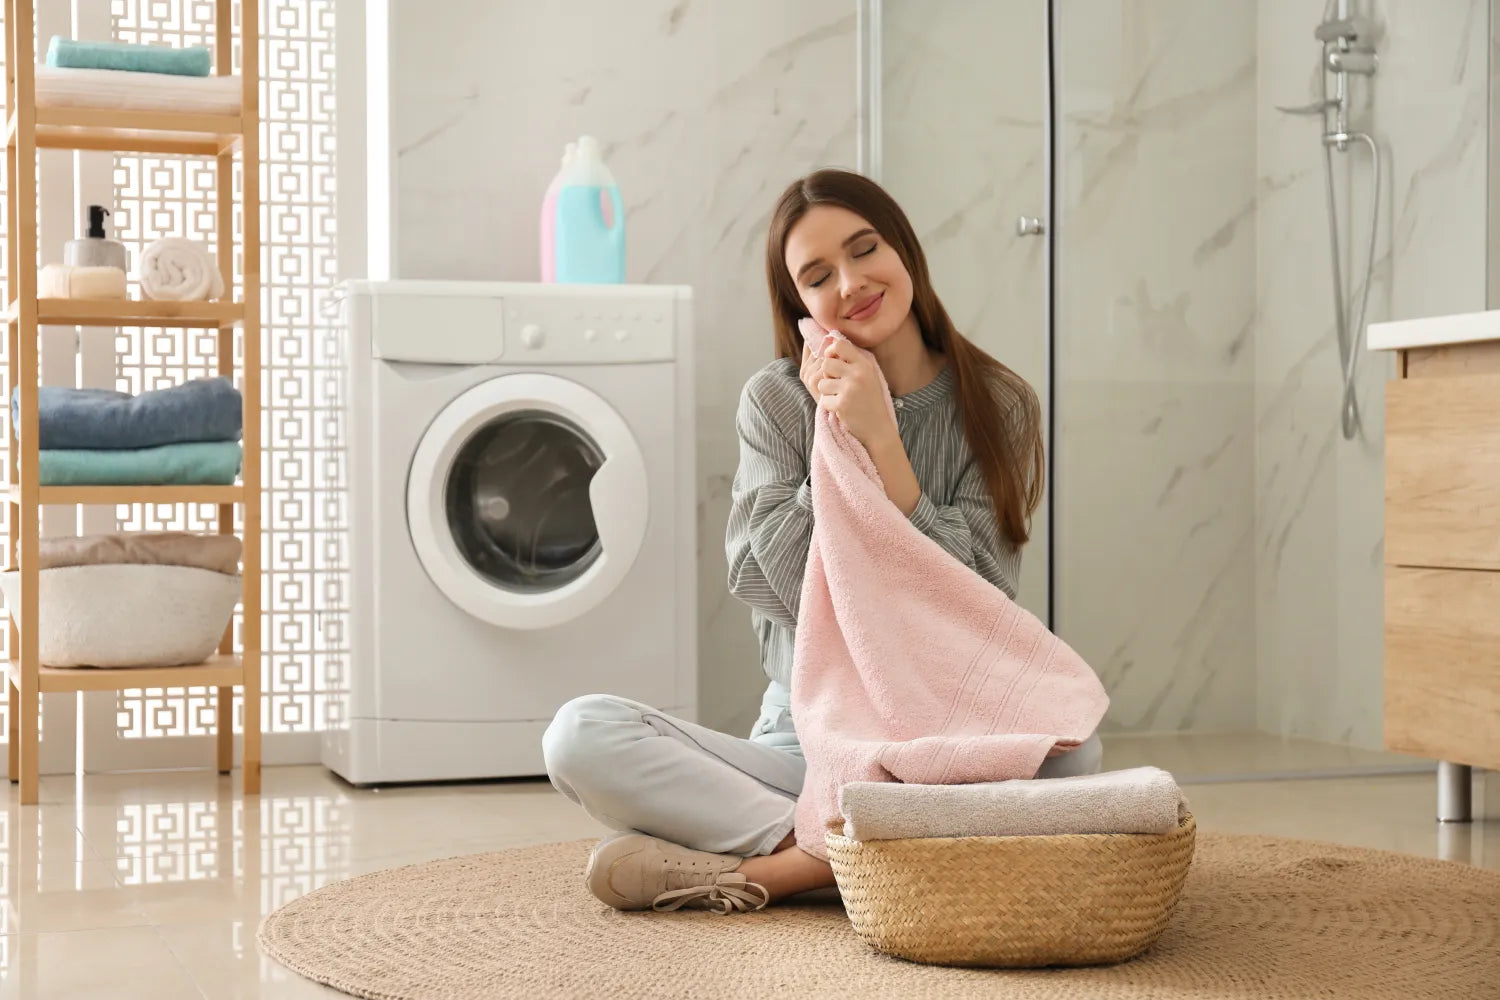 How to soften crunchy towels: Natural method softens 'stiff' and 'crunchy'  towels